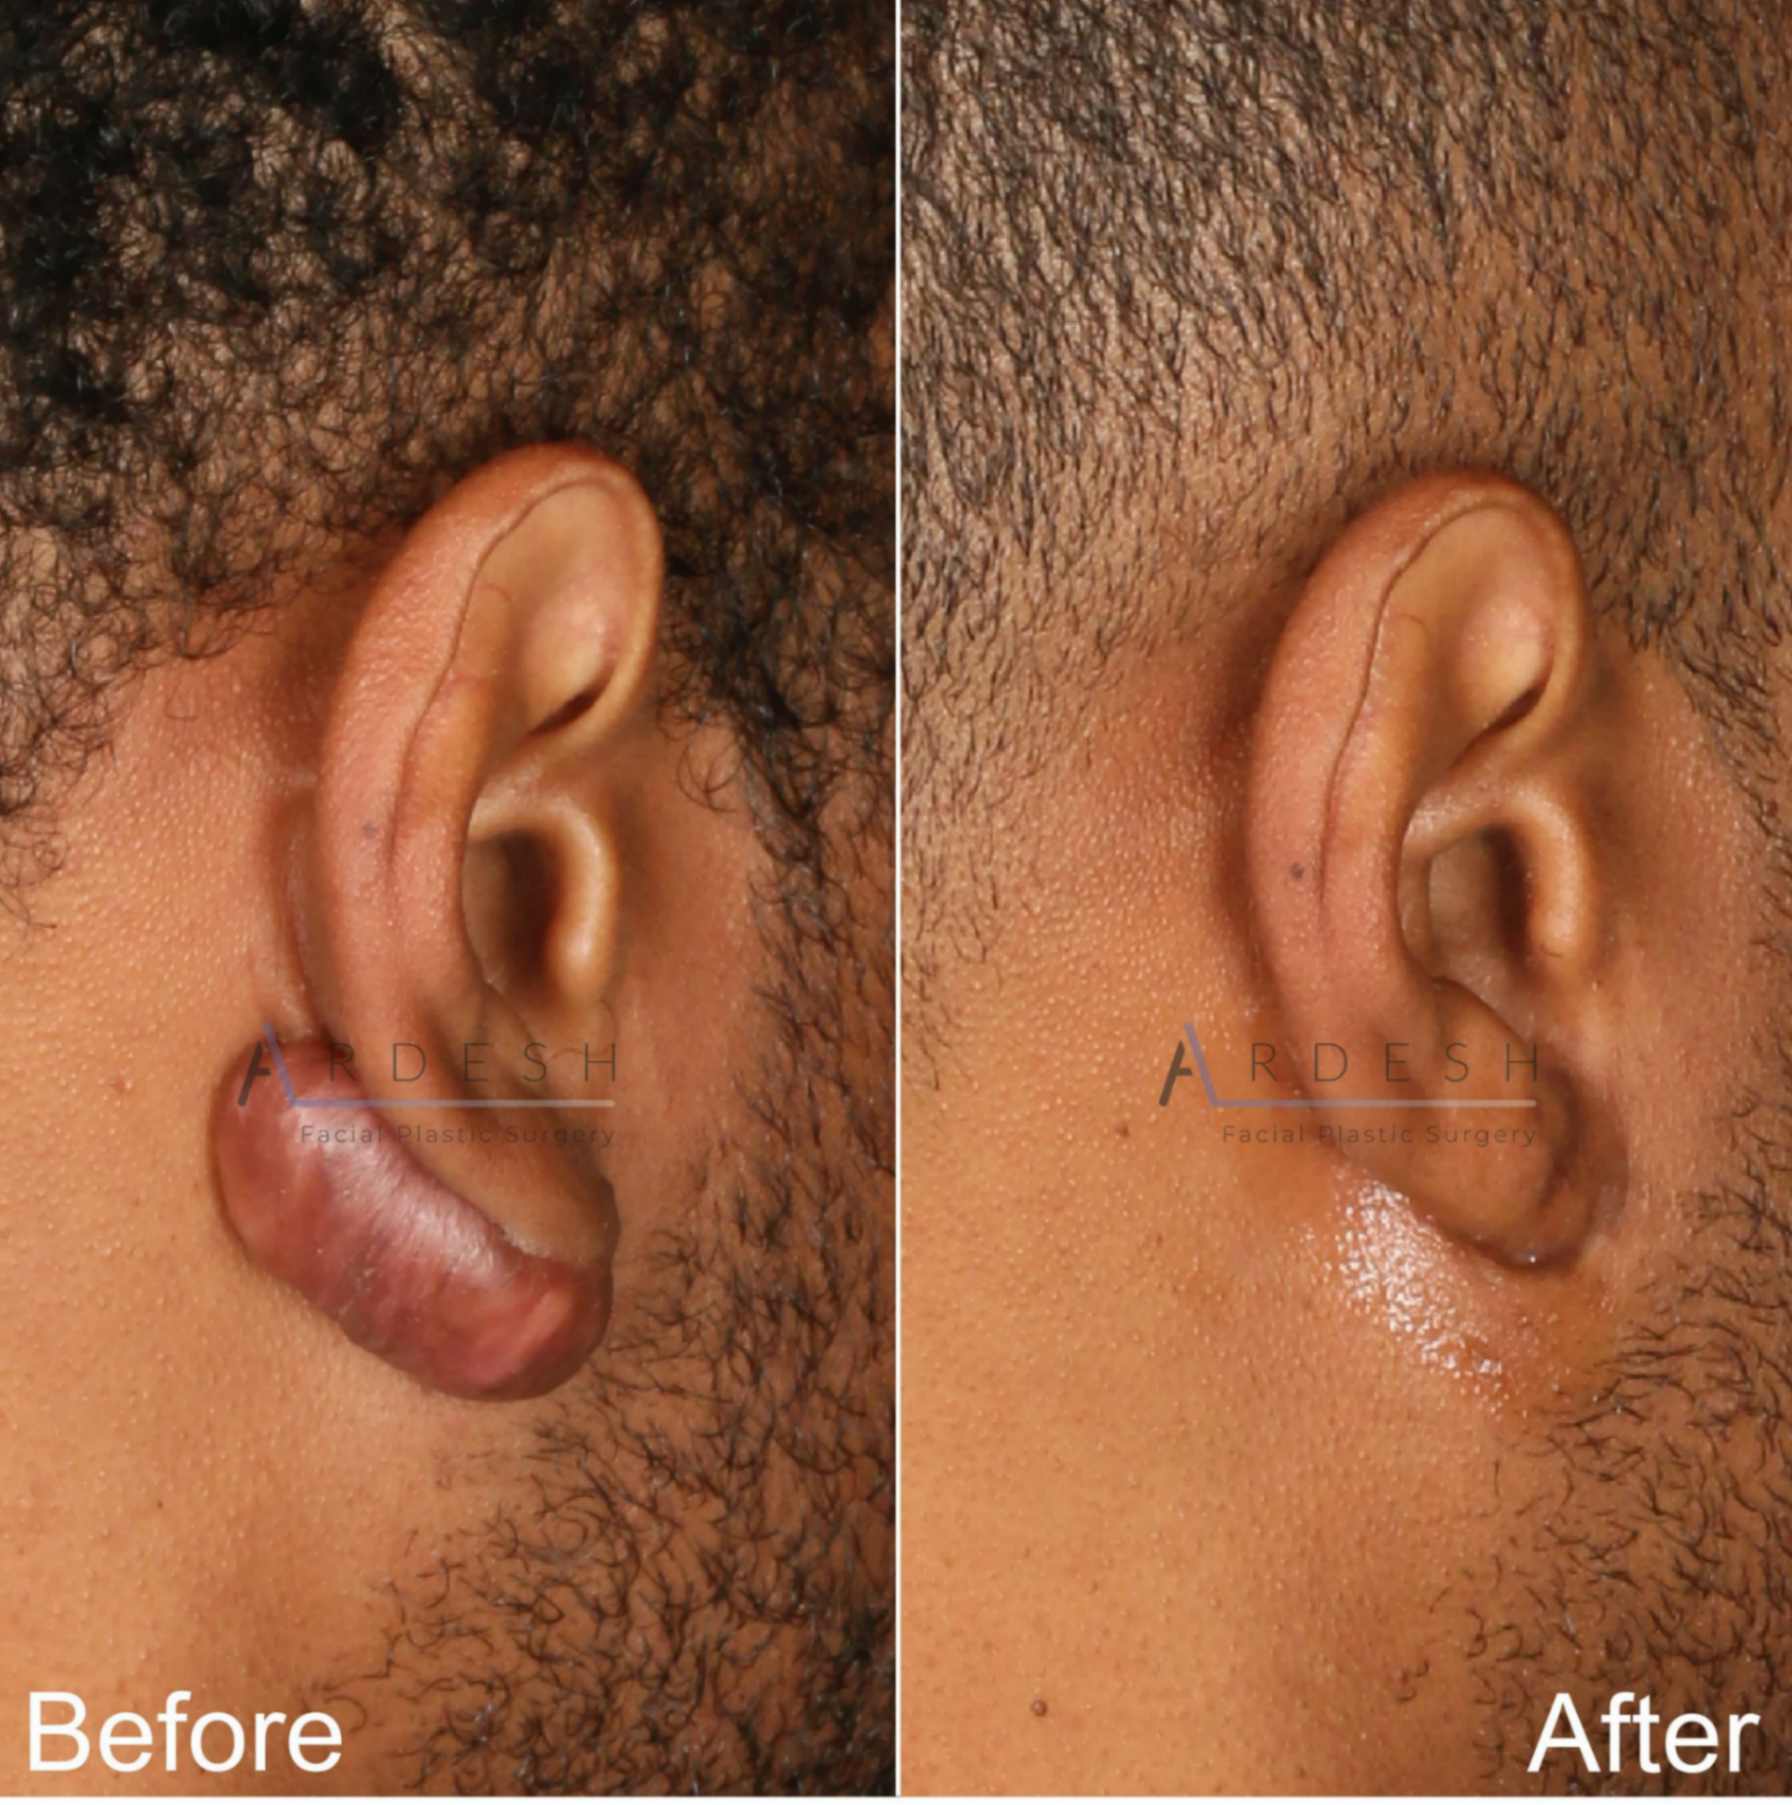 Ear Surgery Before and After | Ardesh Facial Plastic Surgery